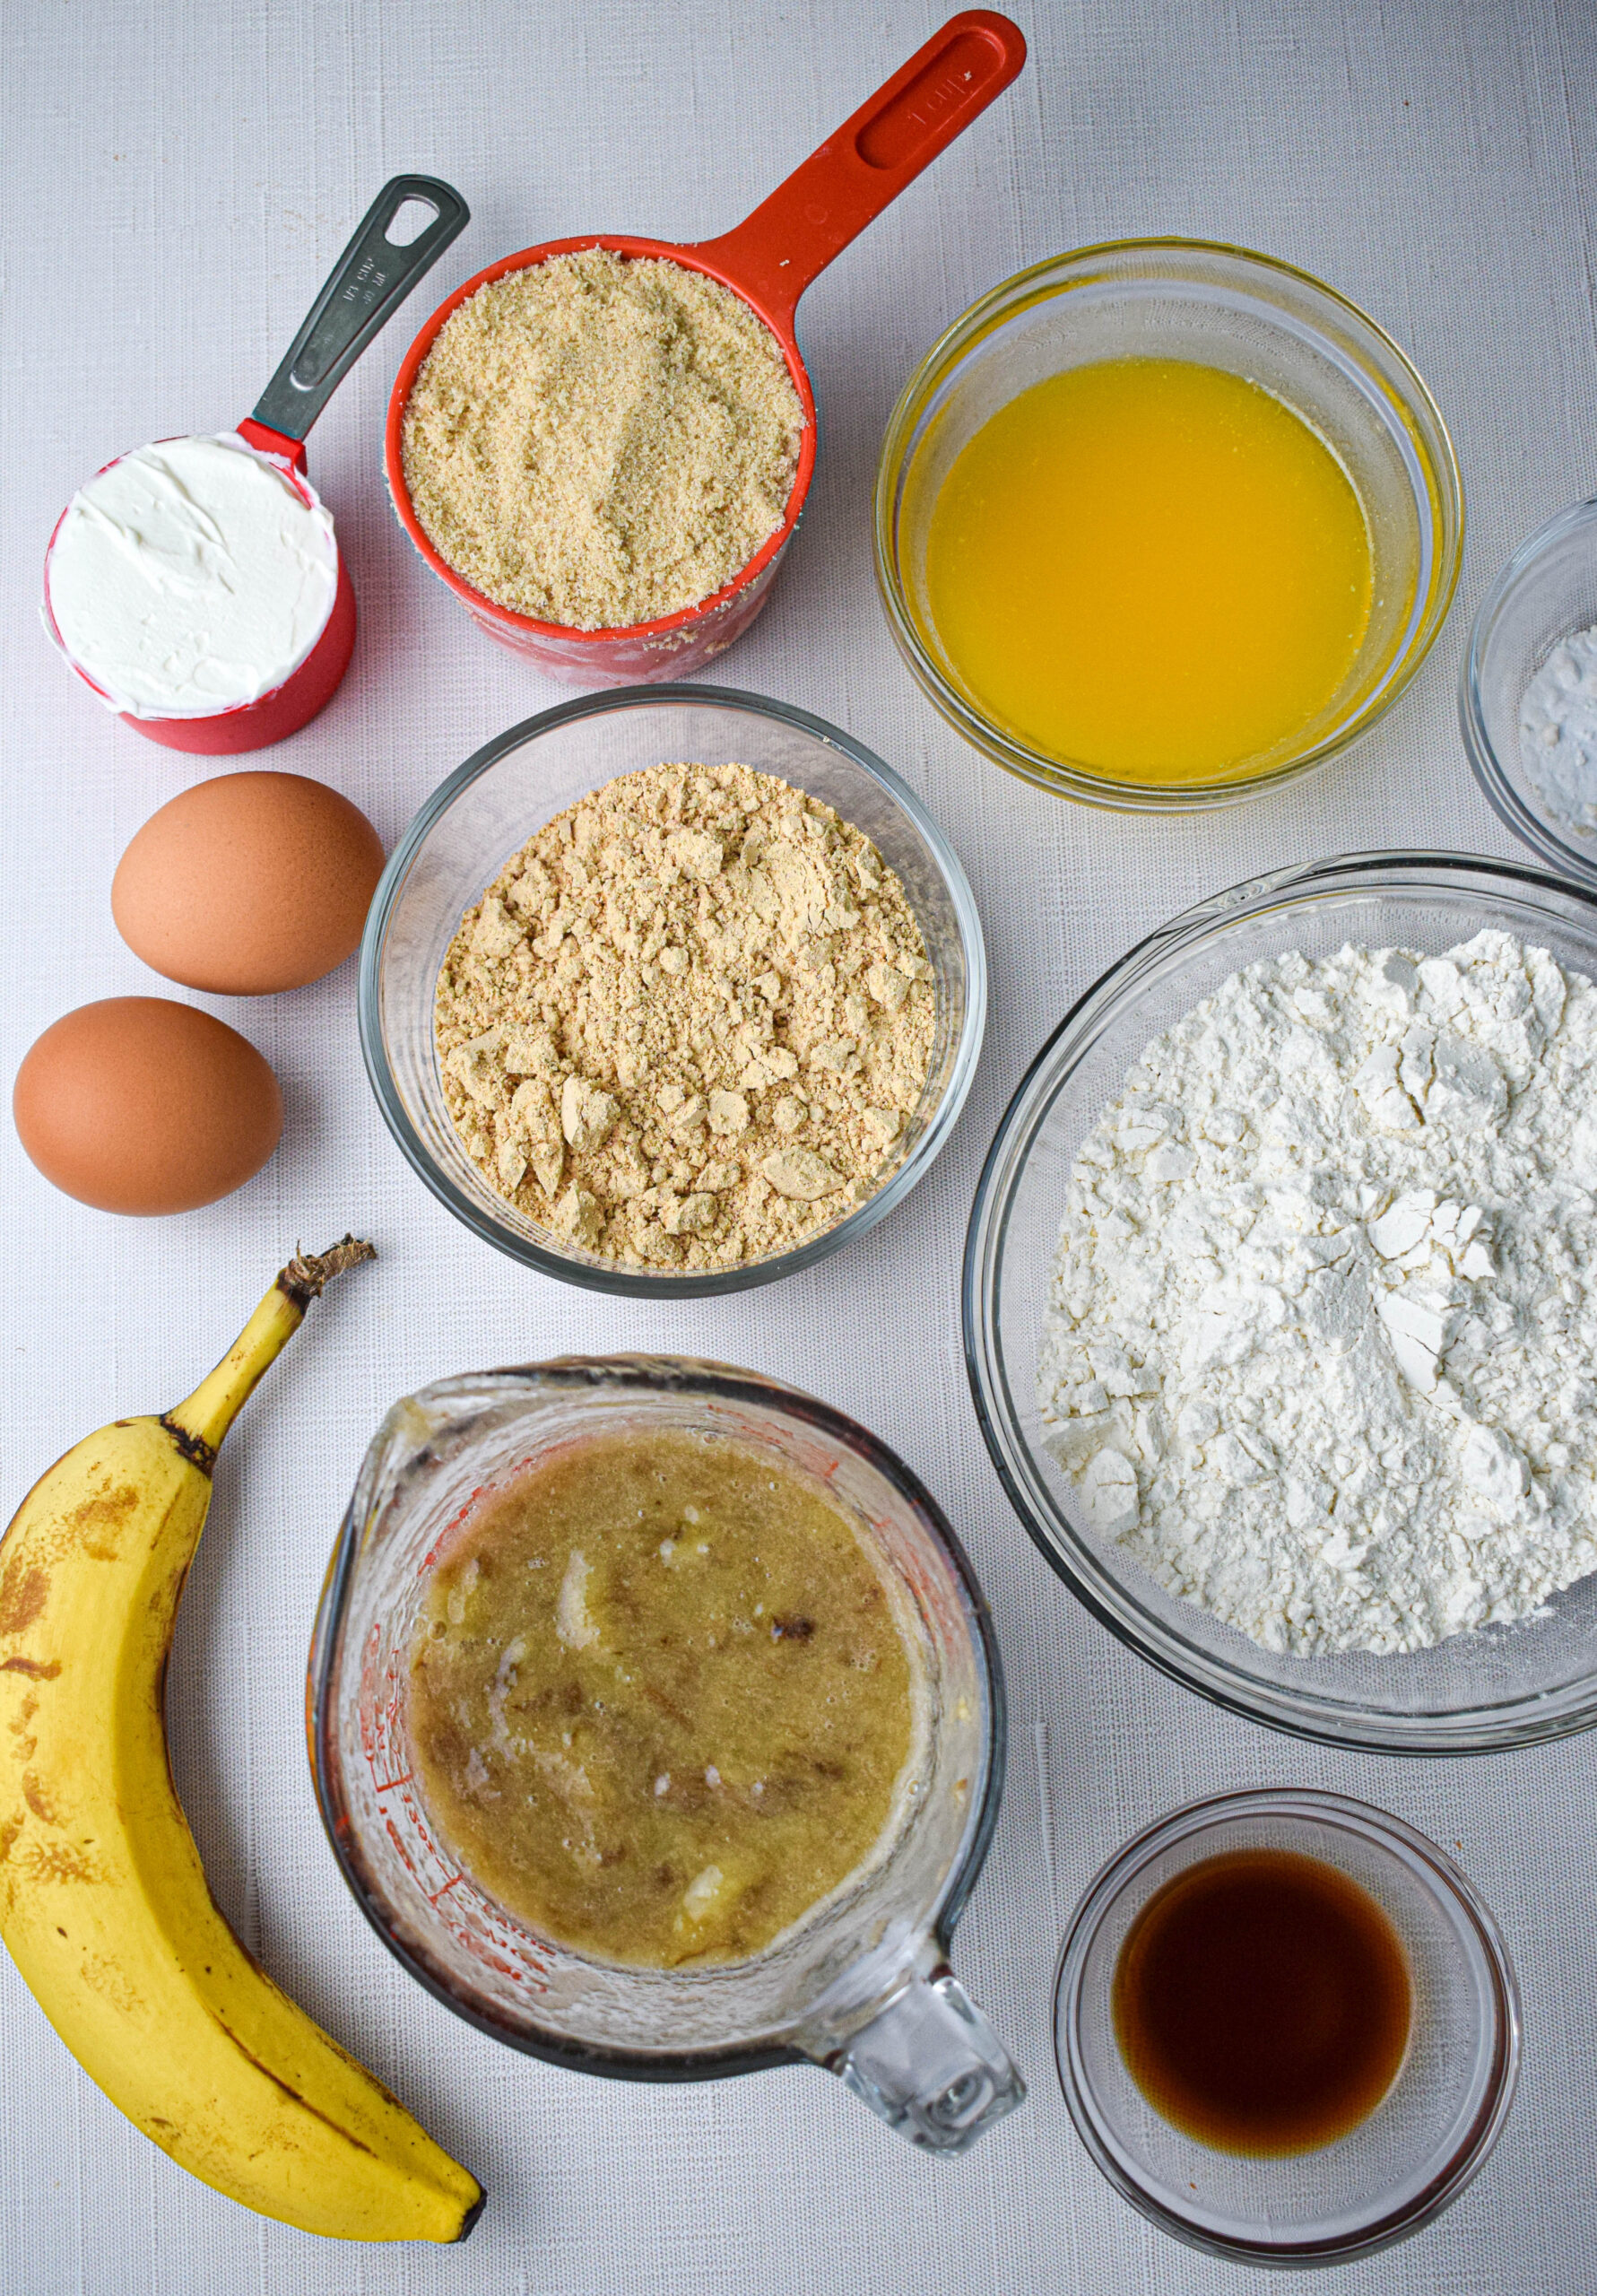 ingredients for banana peanut butter quick bread: flour, mashed bananas, eggs, peanut butter powder, brown sugar, sour cream. melted butter, vanilla extract, baking soda